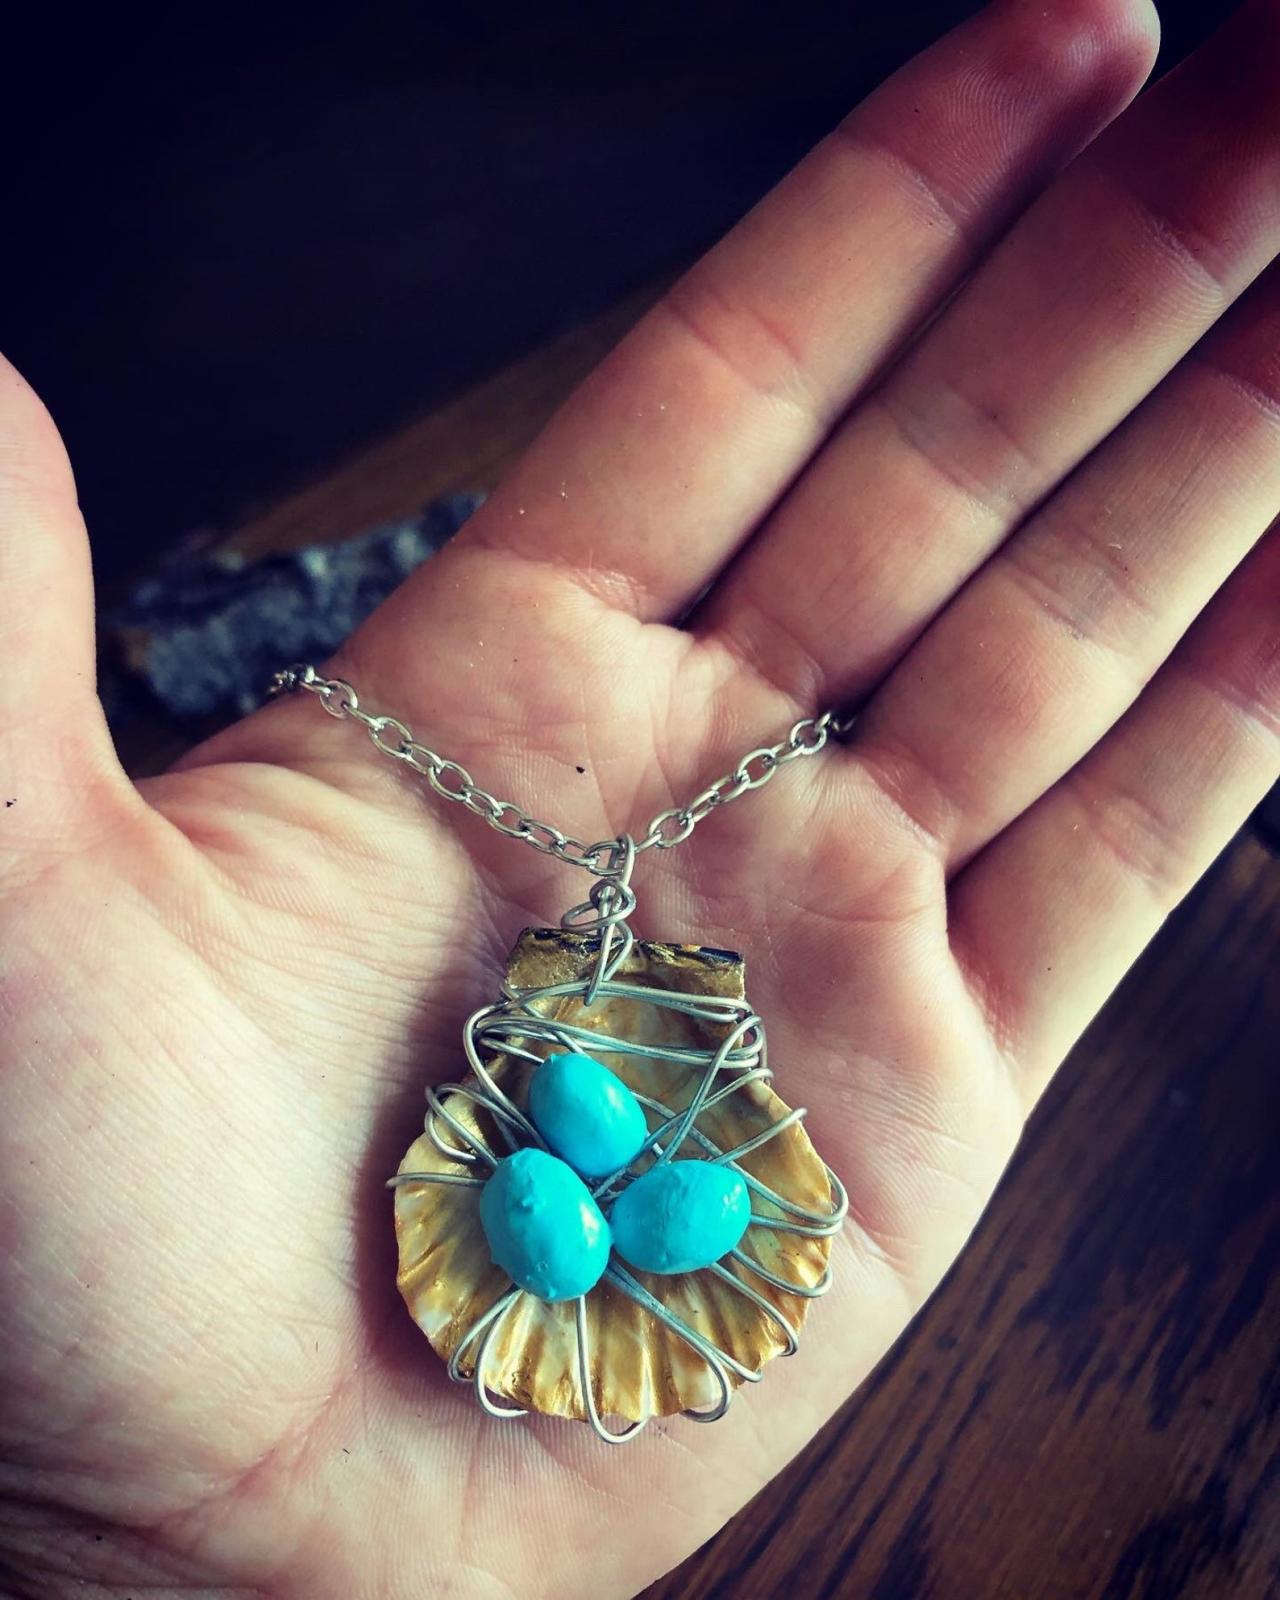 Birdnest Necklace [with Chain], Mom Jewelry, Mom Gift, Mom Necklace, Family Necklace, Christmas Gift Wrapped Shell Bird Nest Pendent Necklace